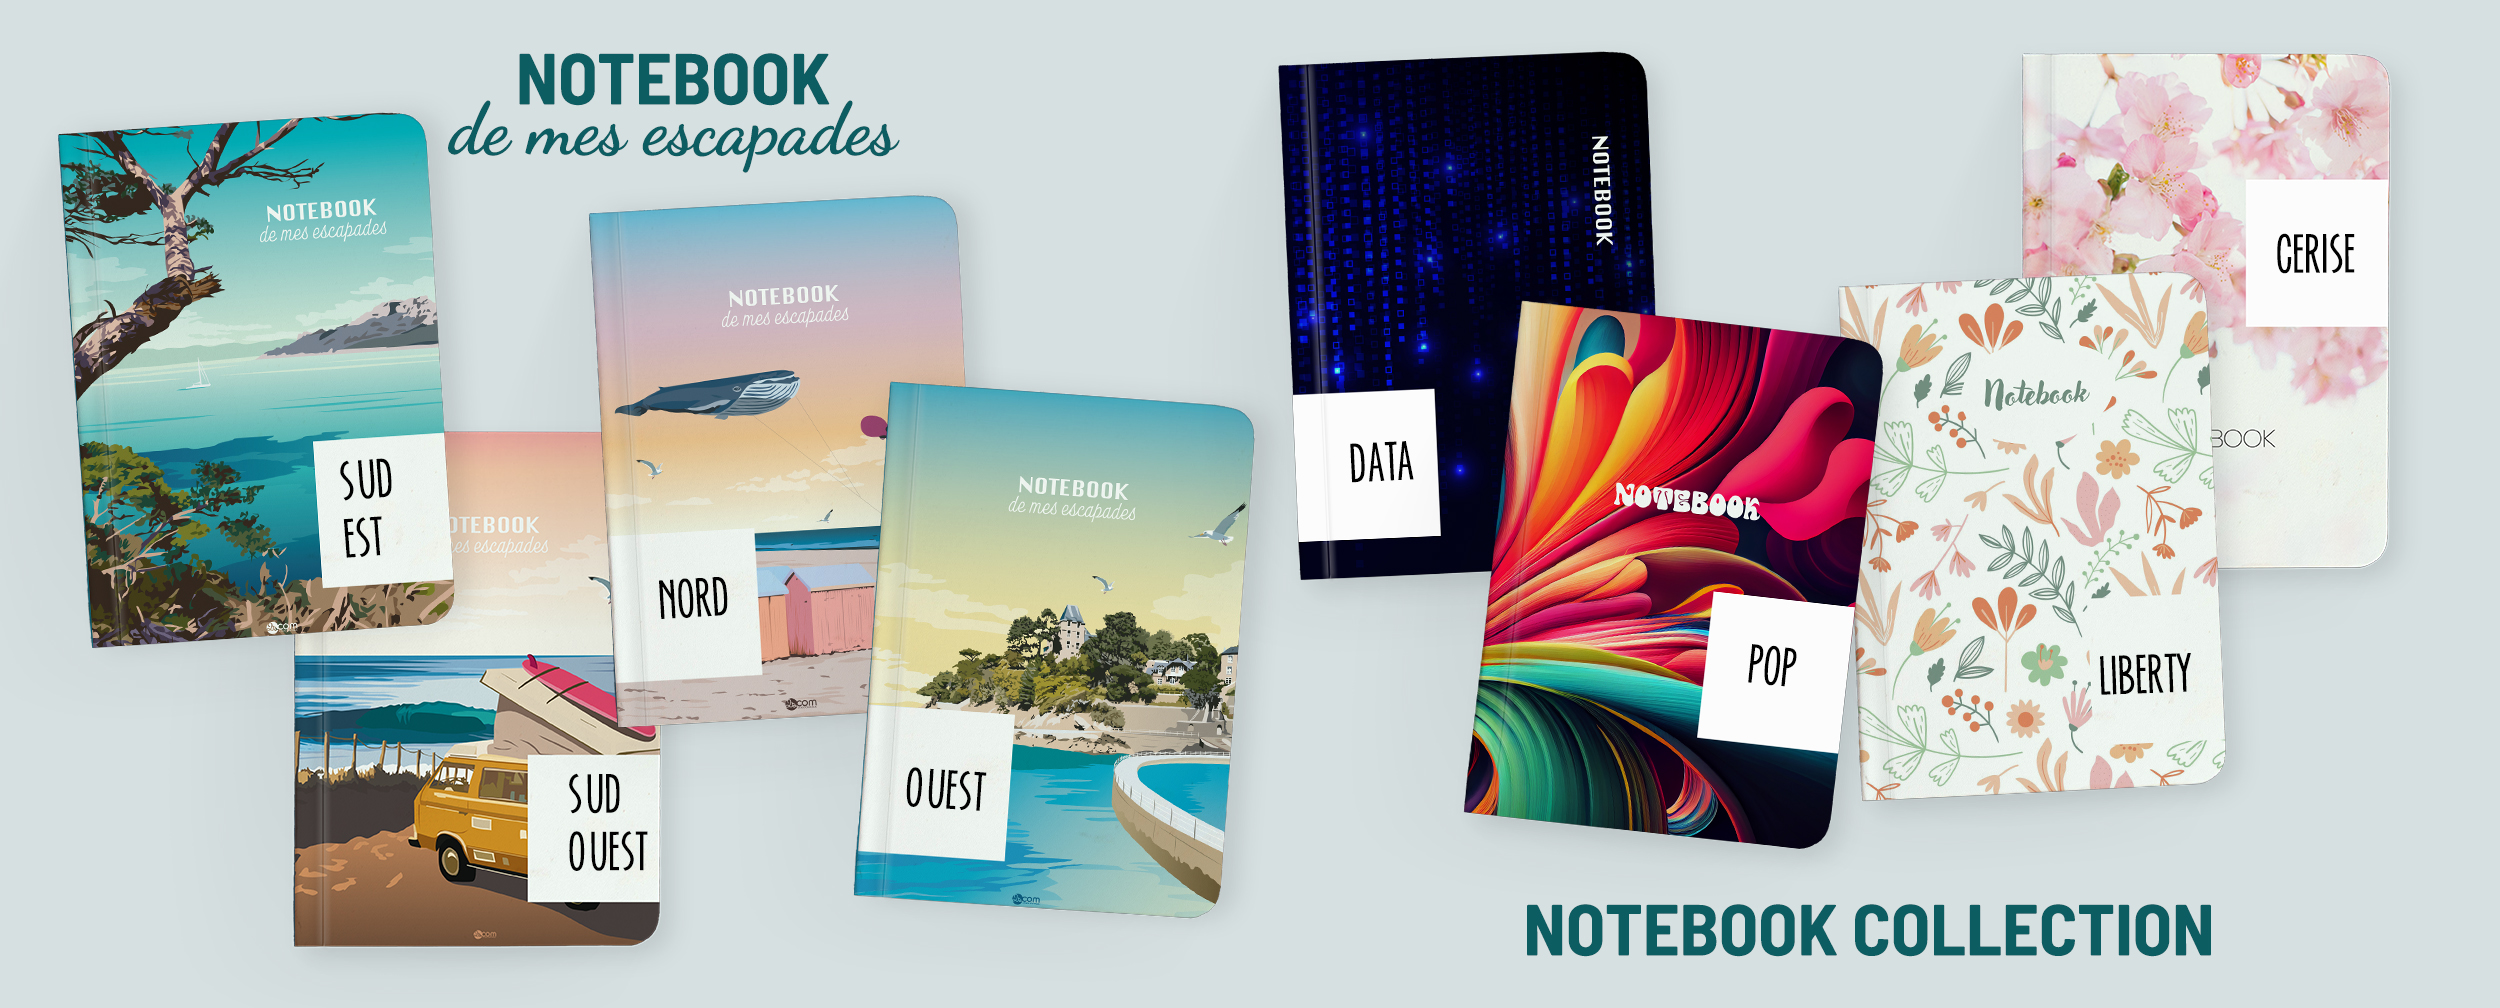 NOTEBOOKS COLLECTION